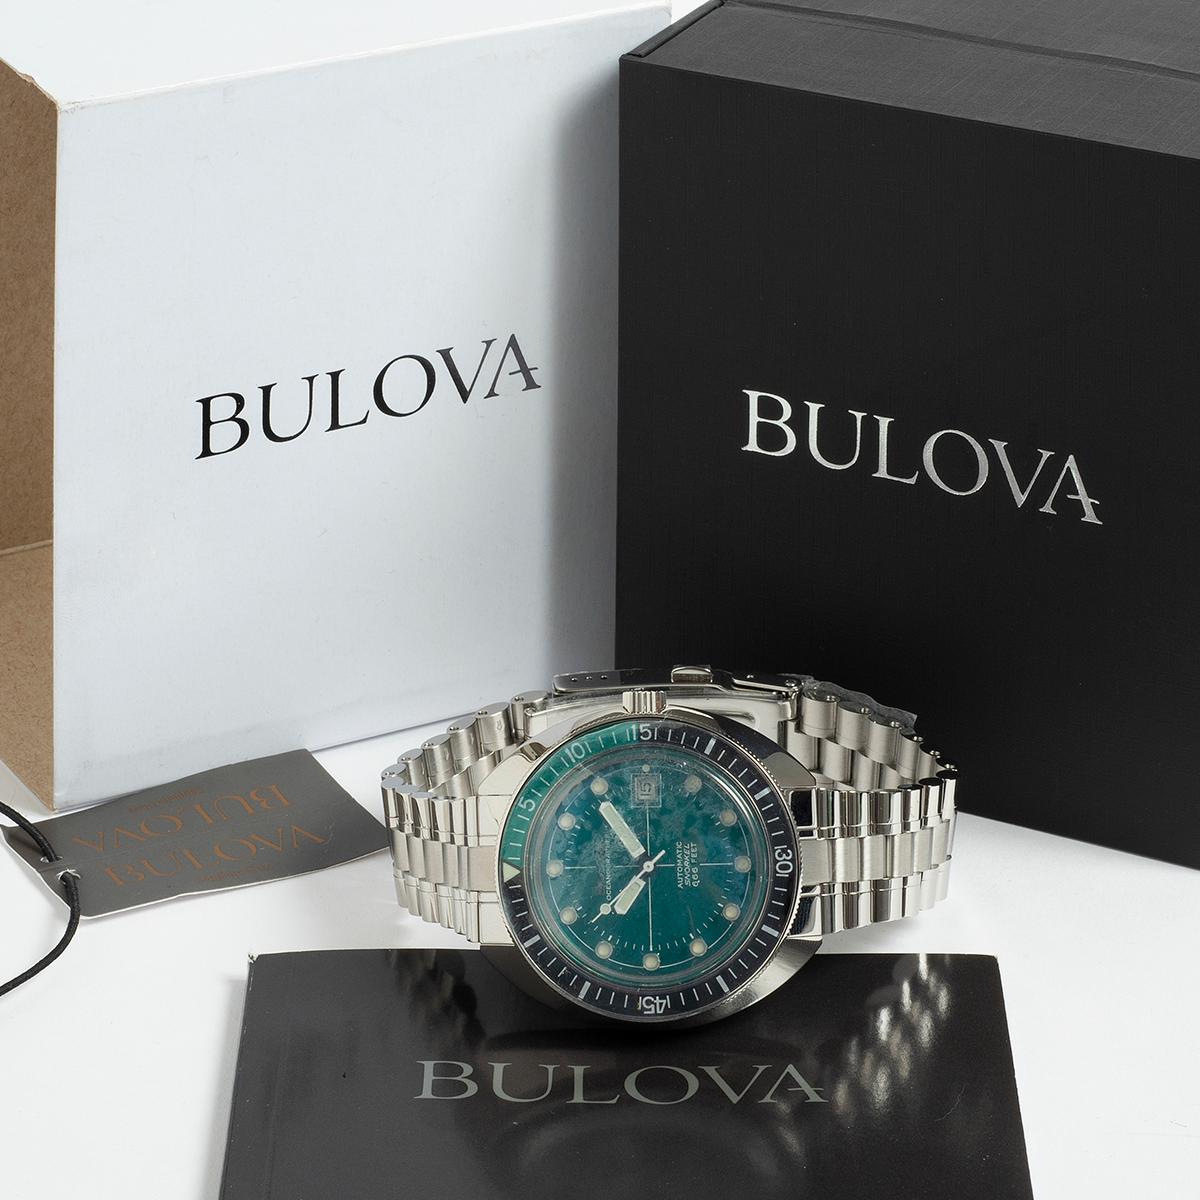 Our Bulova special edition Oceanographer reference 96B322 Devil Diver is presented in unworn condition with factory stickers attached, and is a complete set including swing tag, box instructions and warranty card dated 2021, showing it was